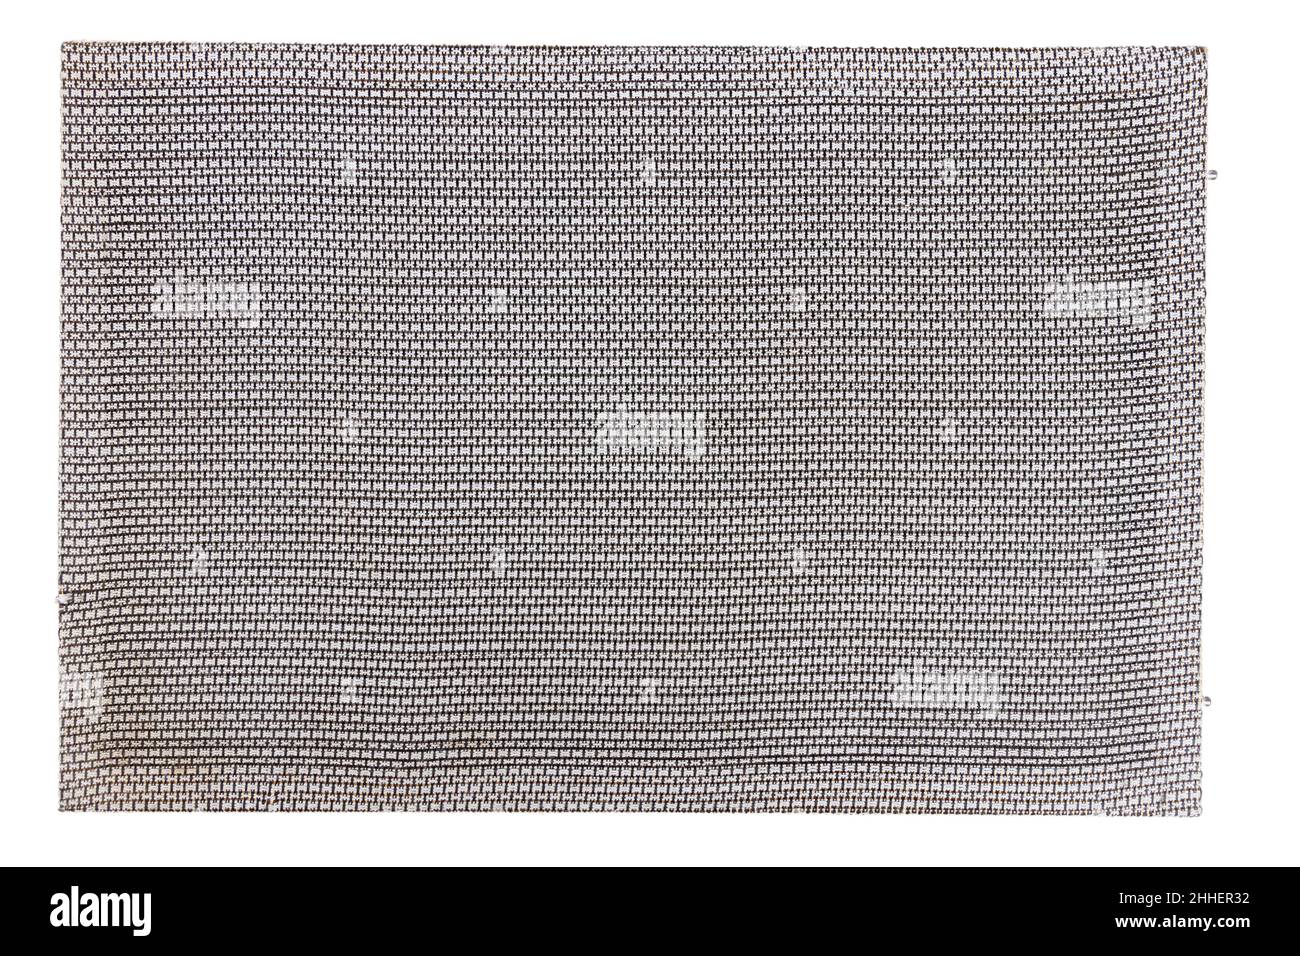 Vintage gray fabric speaker grill isolated on white background Stock Photo